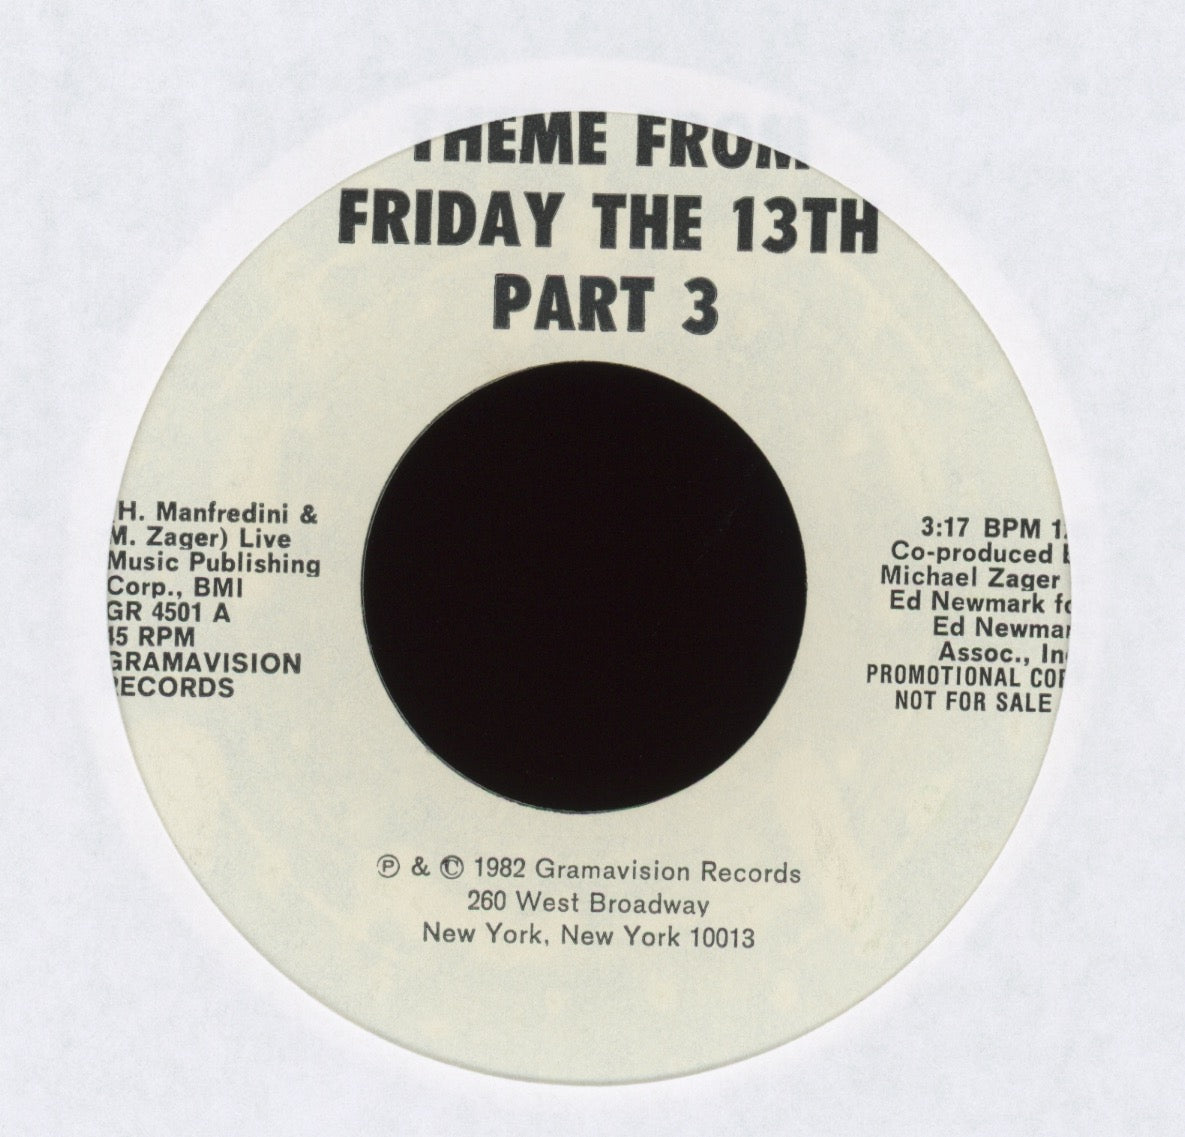 Hot Ice - Theme From Friday The 13th Part 3 on Gramavision Promo